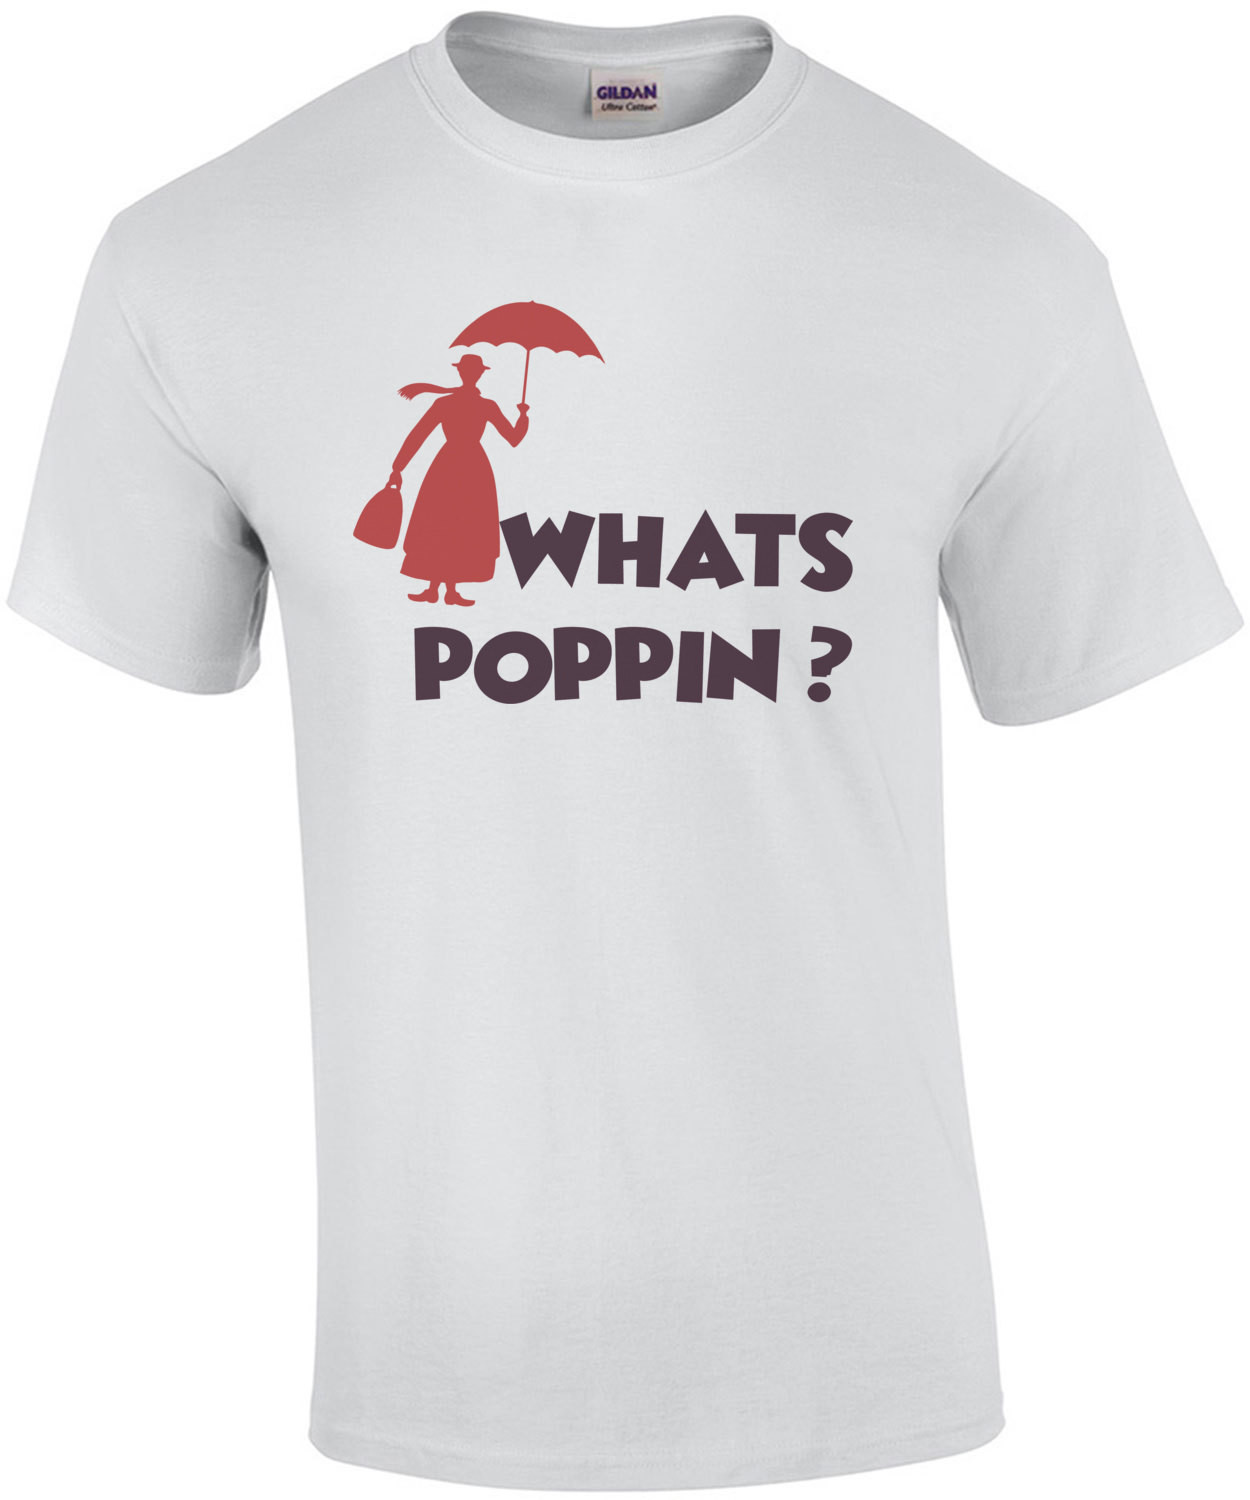 What's Poppin? - Funny Mary Poppins Shirt